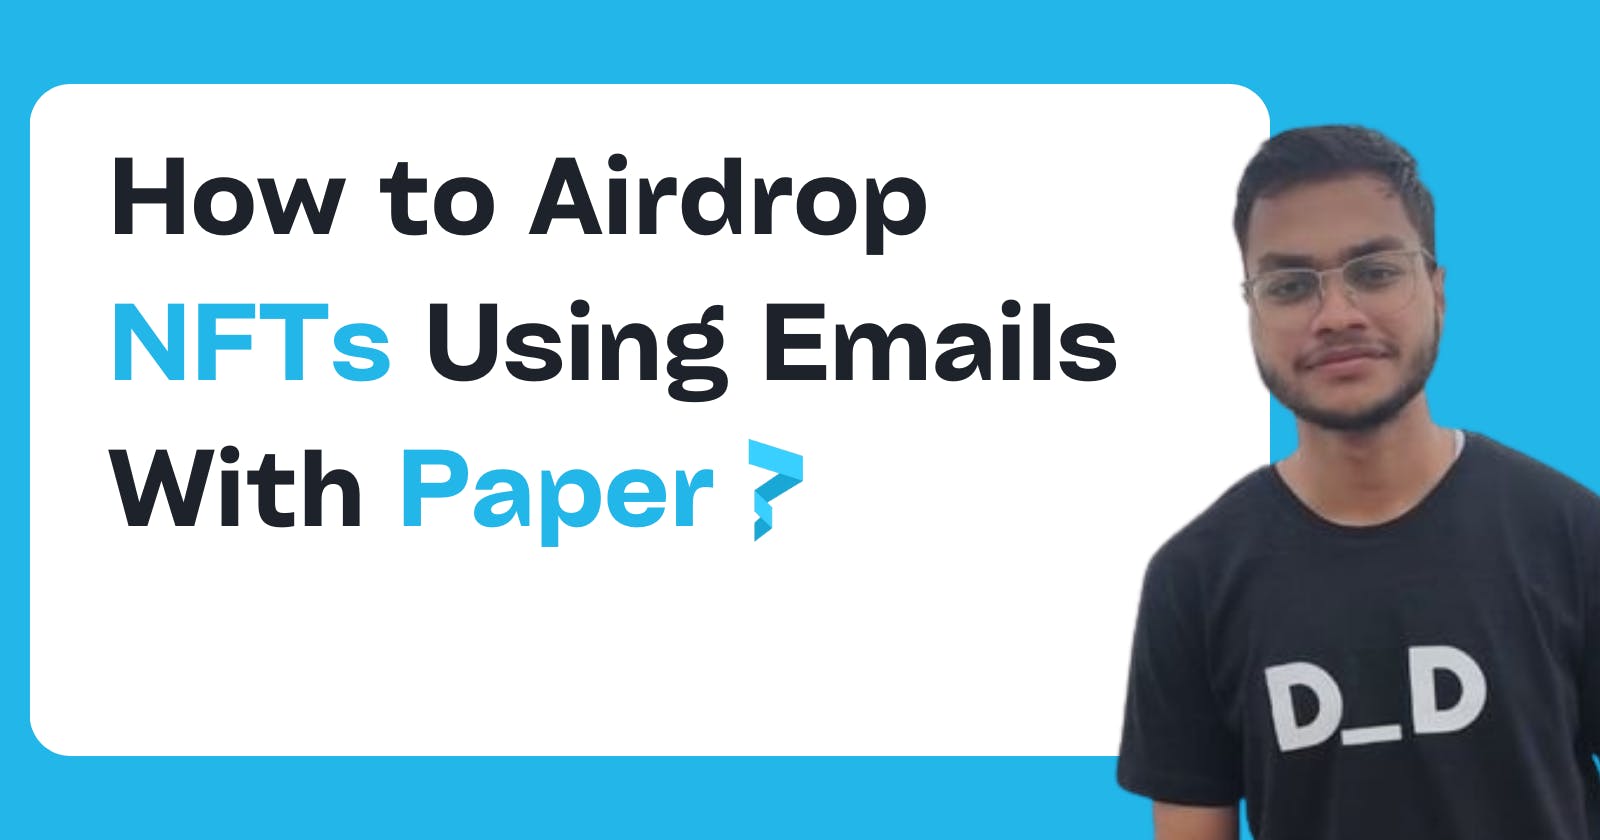 How to Airdrop NFTs Using Emails With Paper